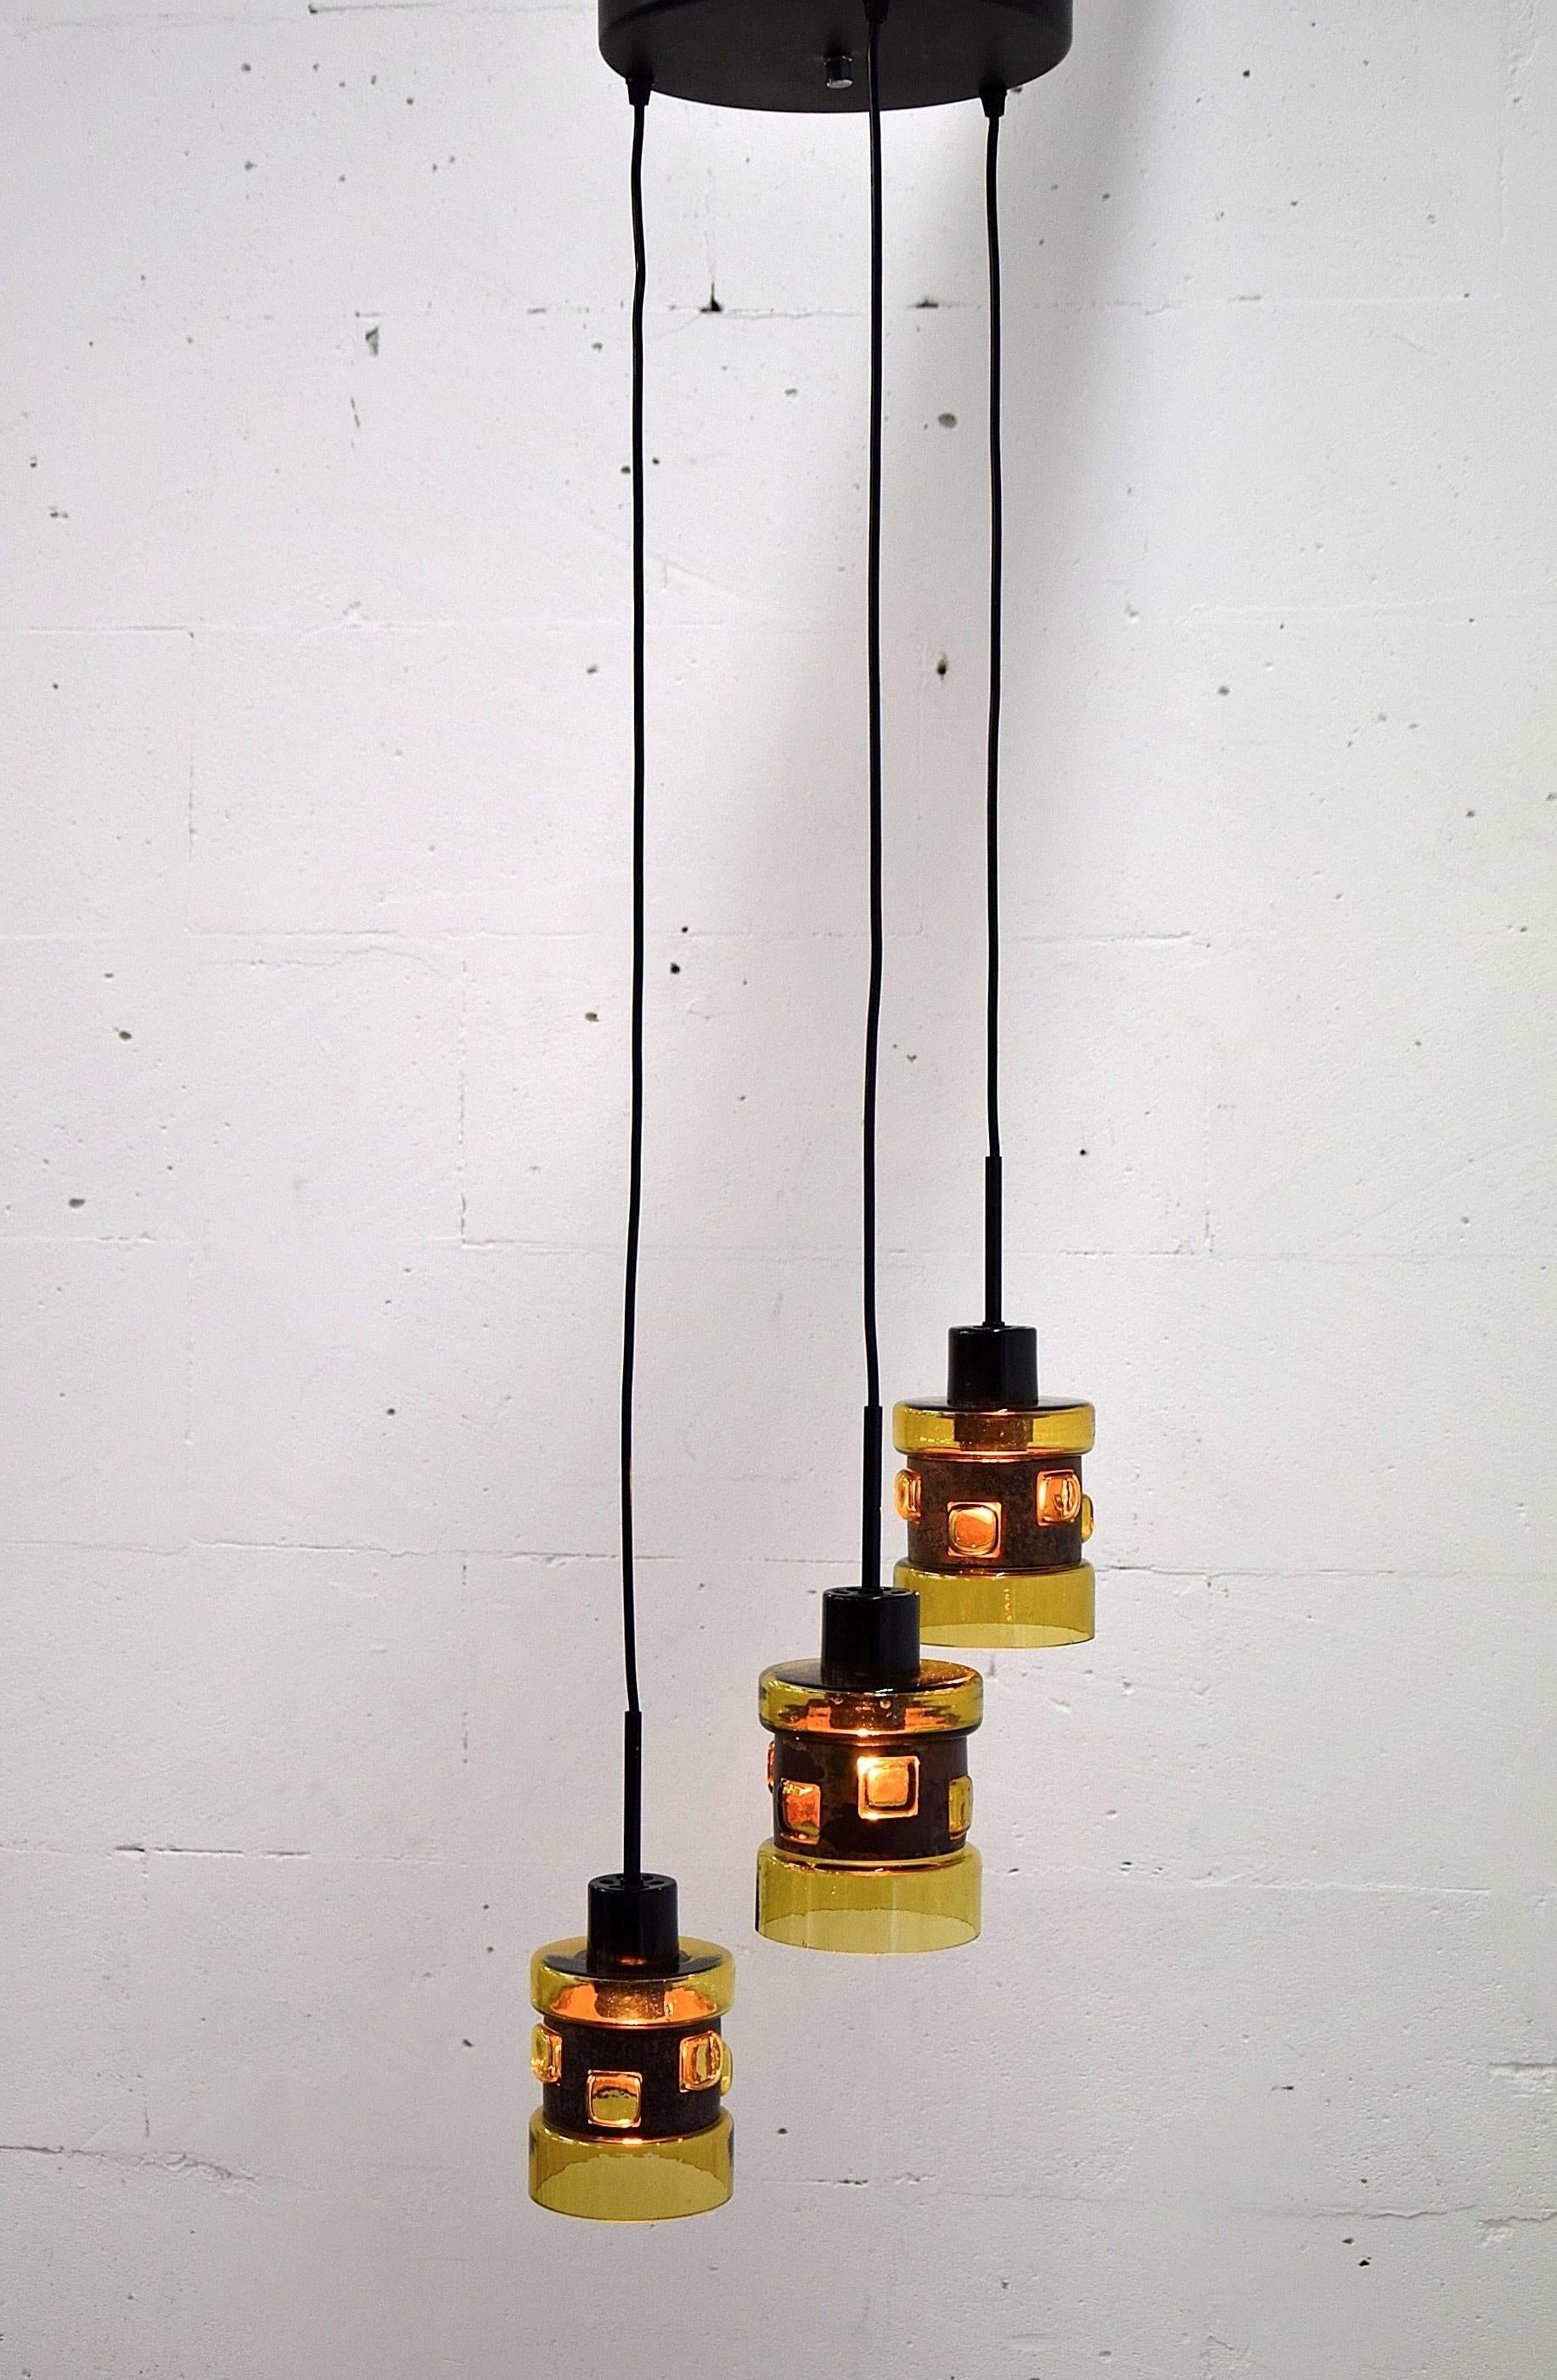 Mid-Century ceiling pendants by Nanny Still McKinney.
Stunning early 1960s amber colored handblown glass with patinated copper perforated rings produced by RAAK, the Netherlands.
Nanny still was influenced by the Arts and Crafts movement which shows